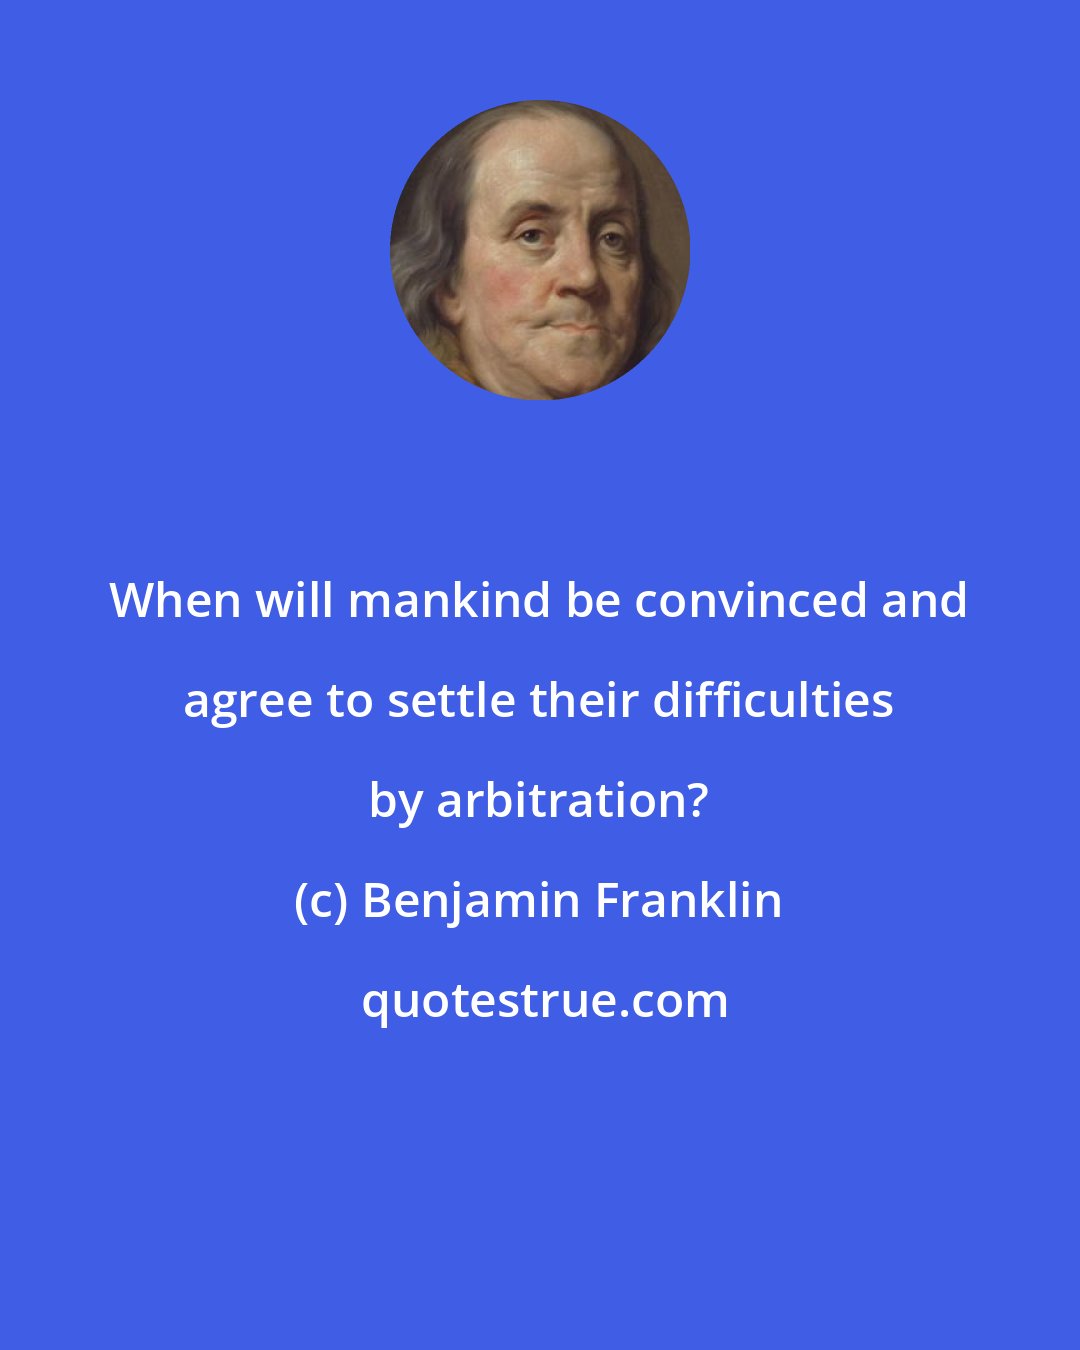 Benjamin Franklin: When will mankind be convinced and agree to settle their difficulties by arbitration?